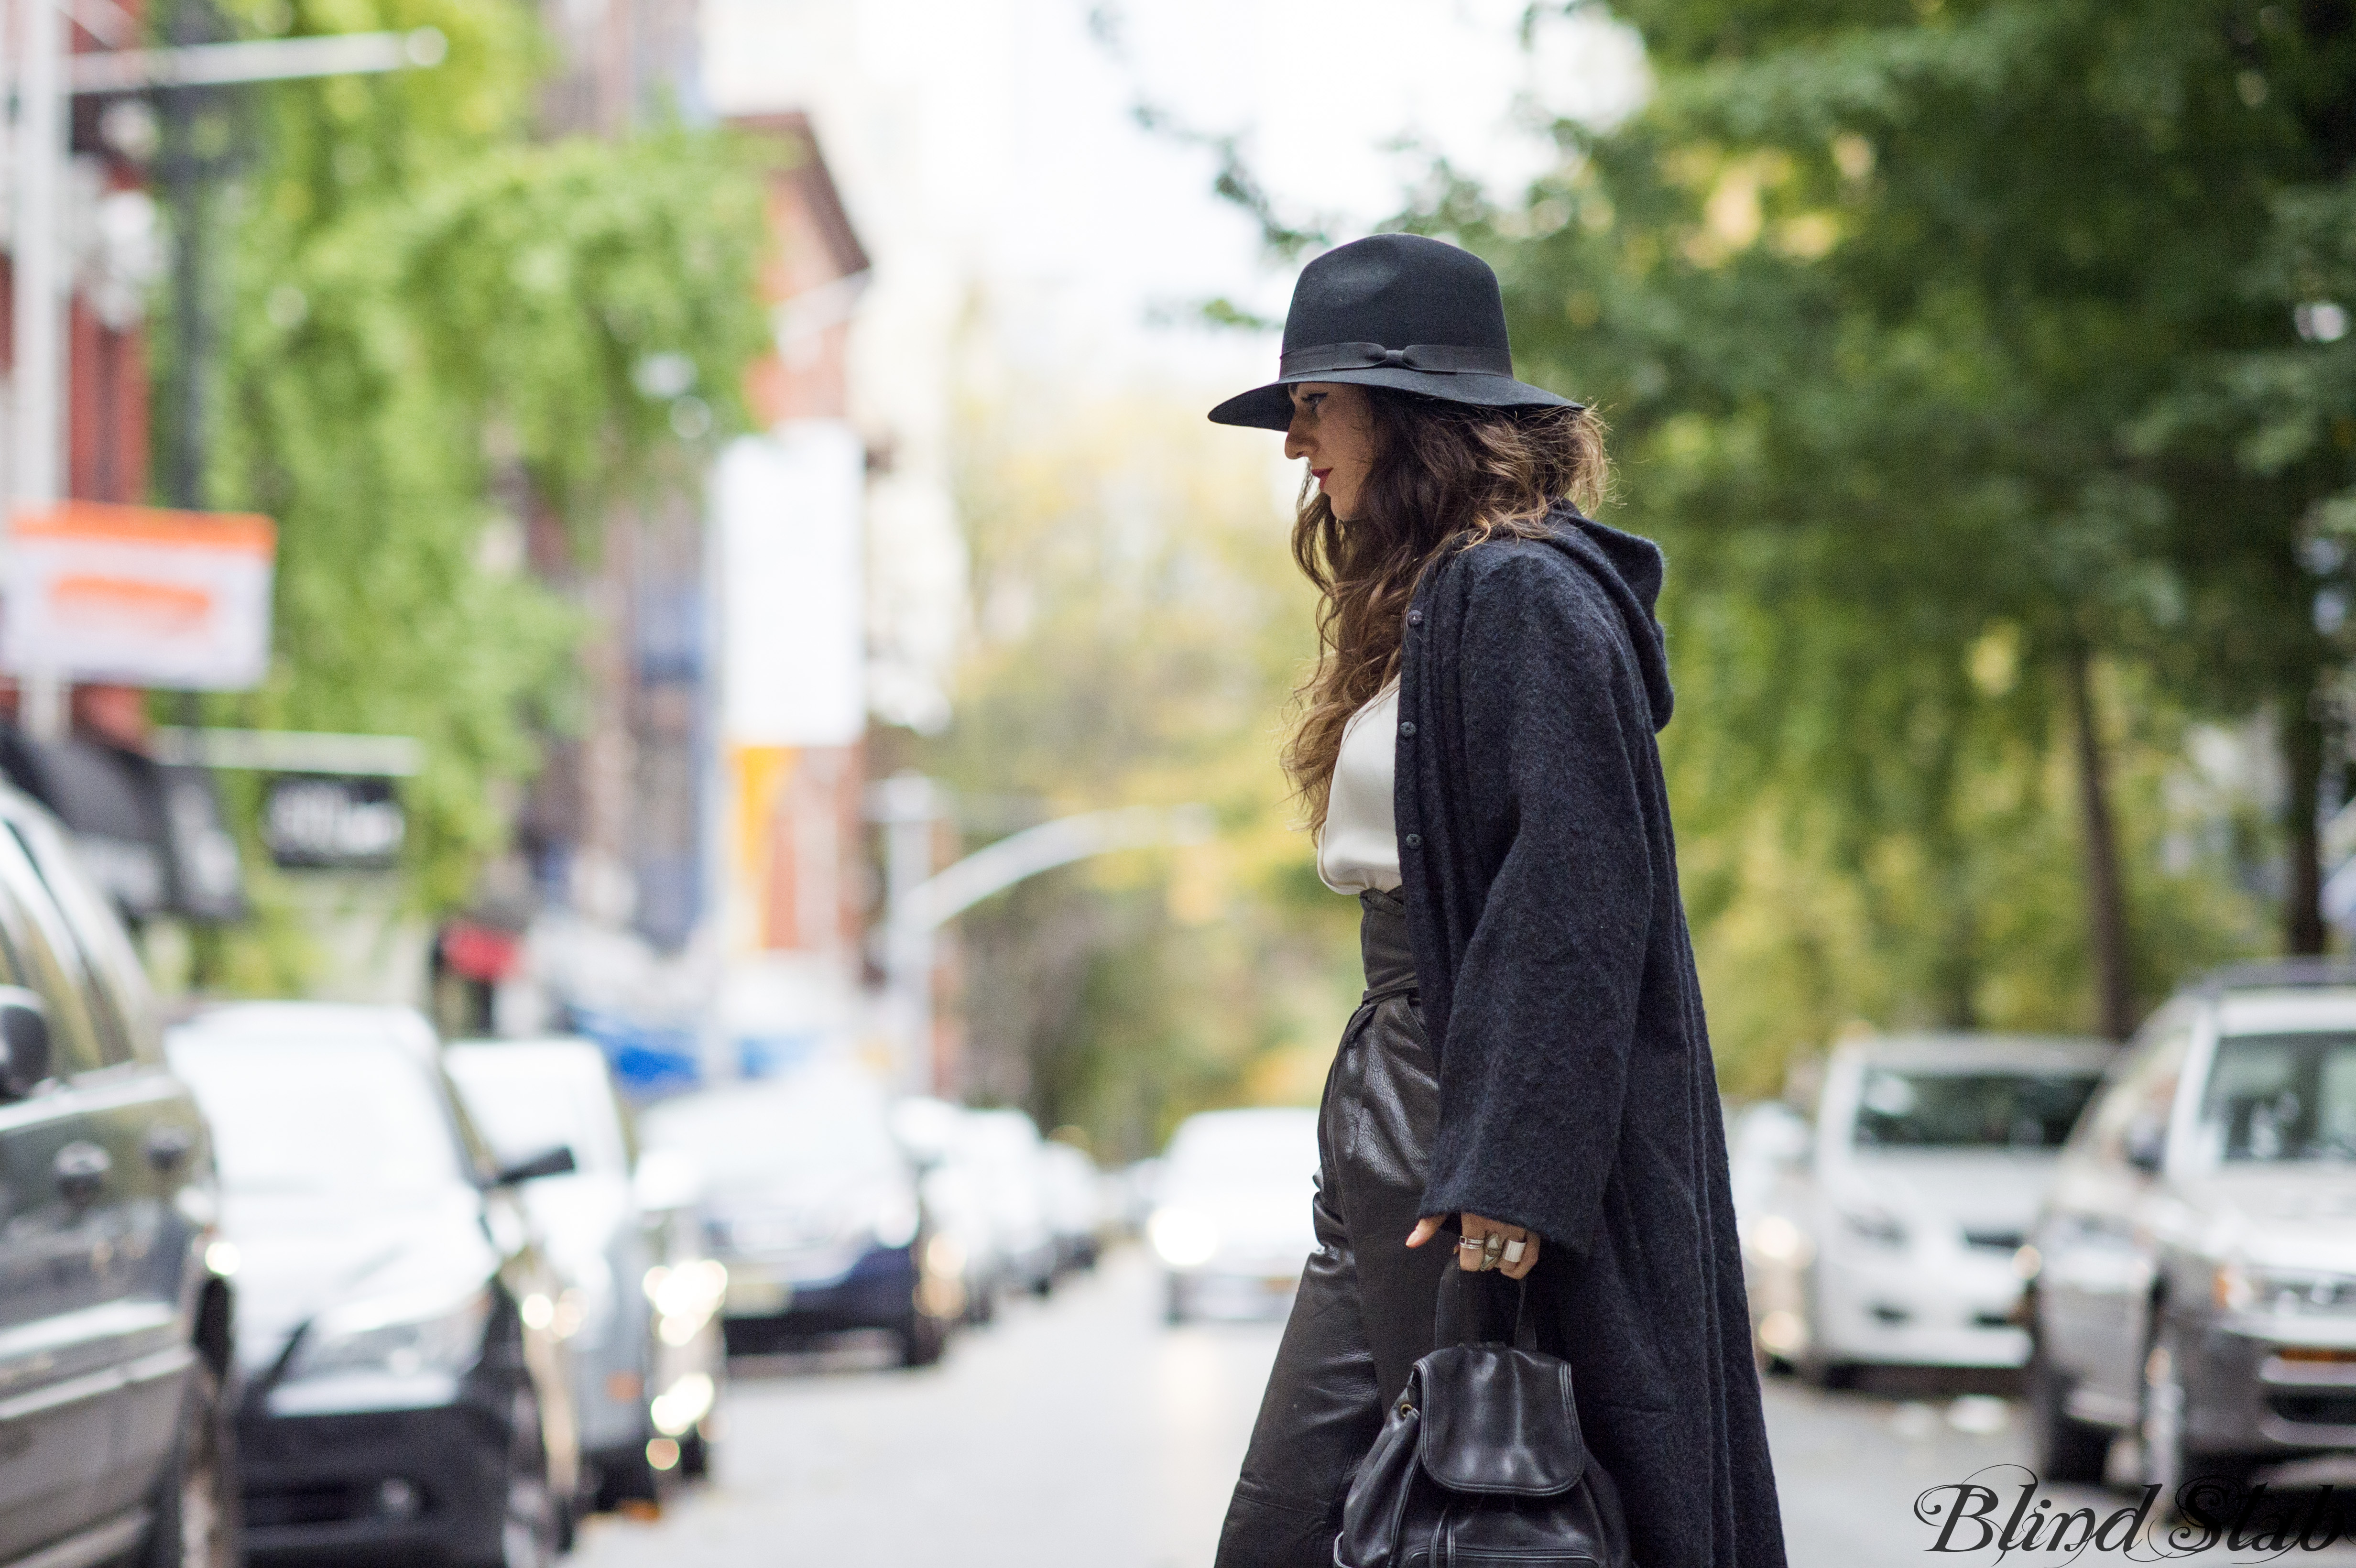 Leather-Pants-Fedora-Ombre-Hair